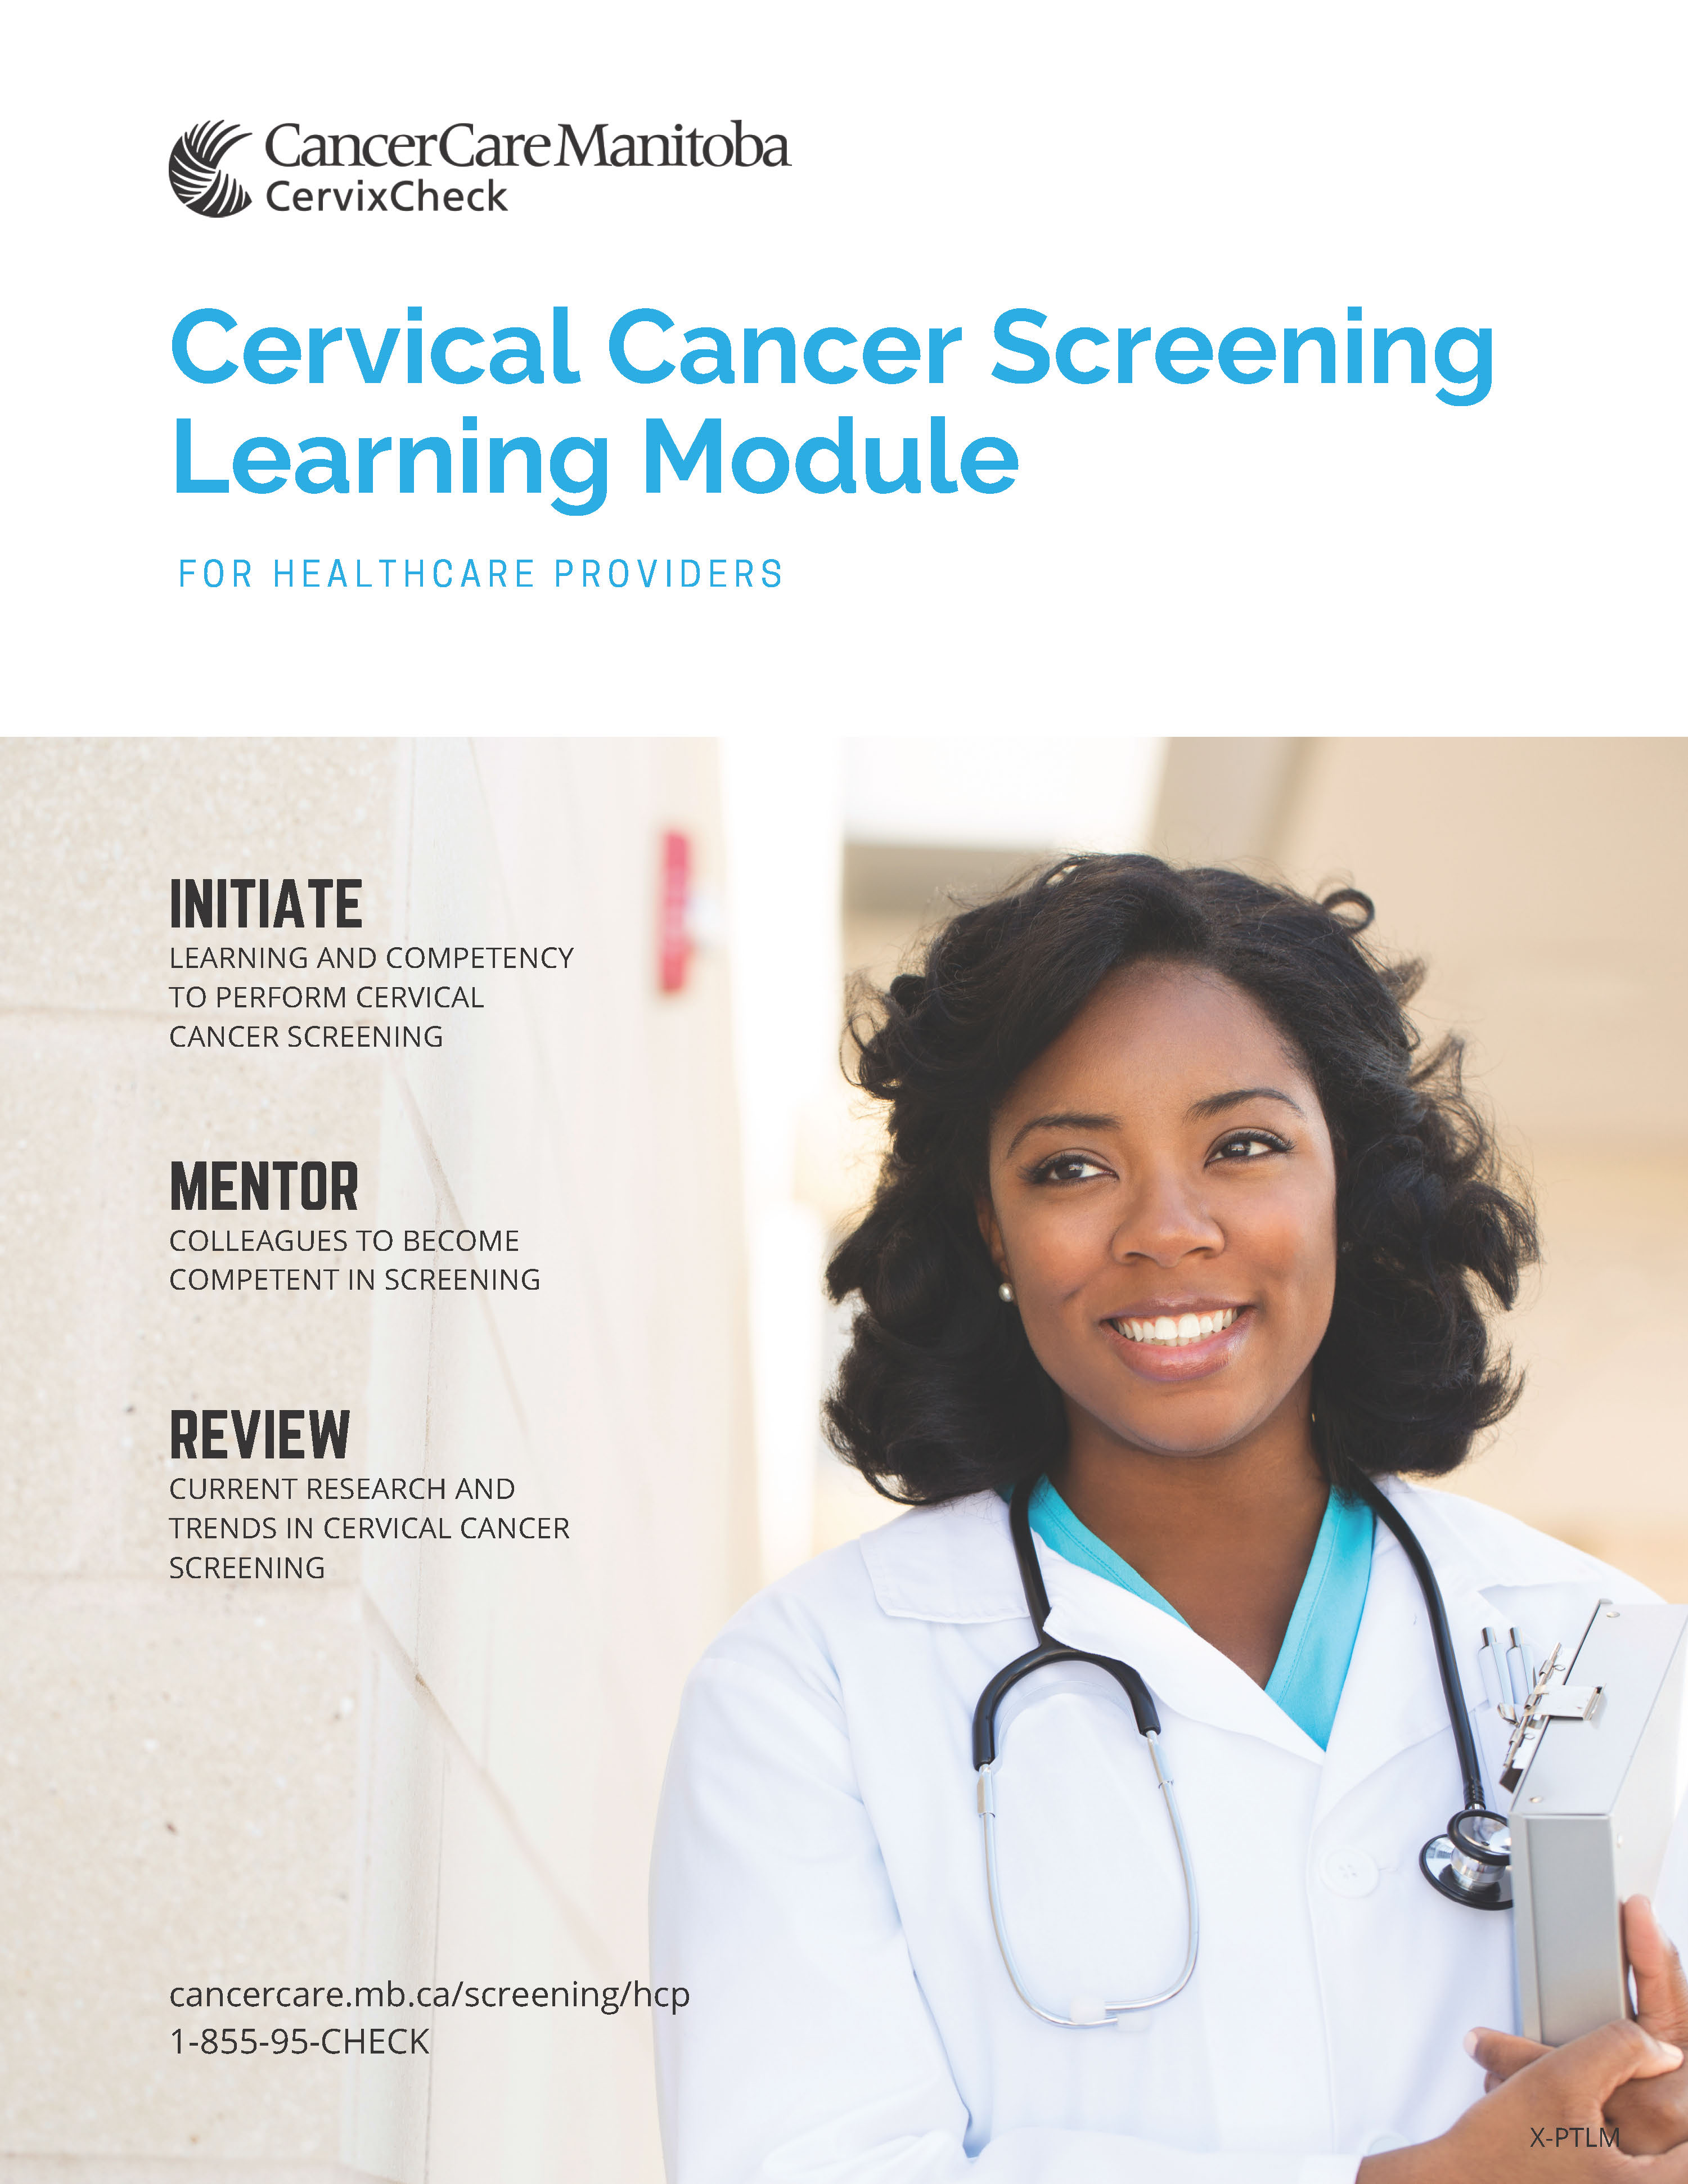 Cervical Cancer Screening Learning Module title page (c) CancerCare Manitoba